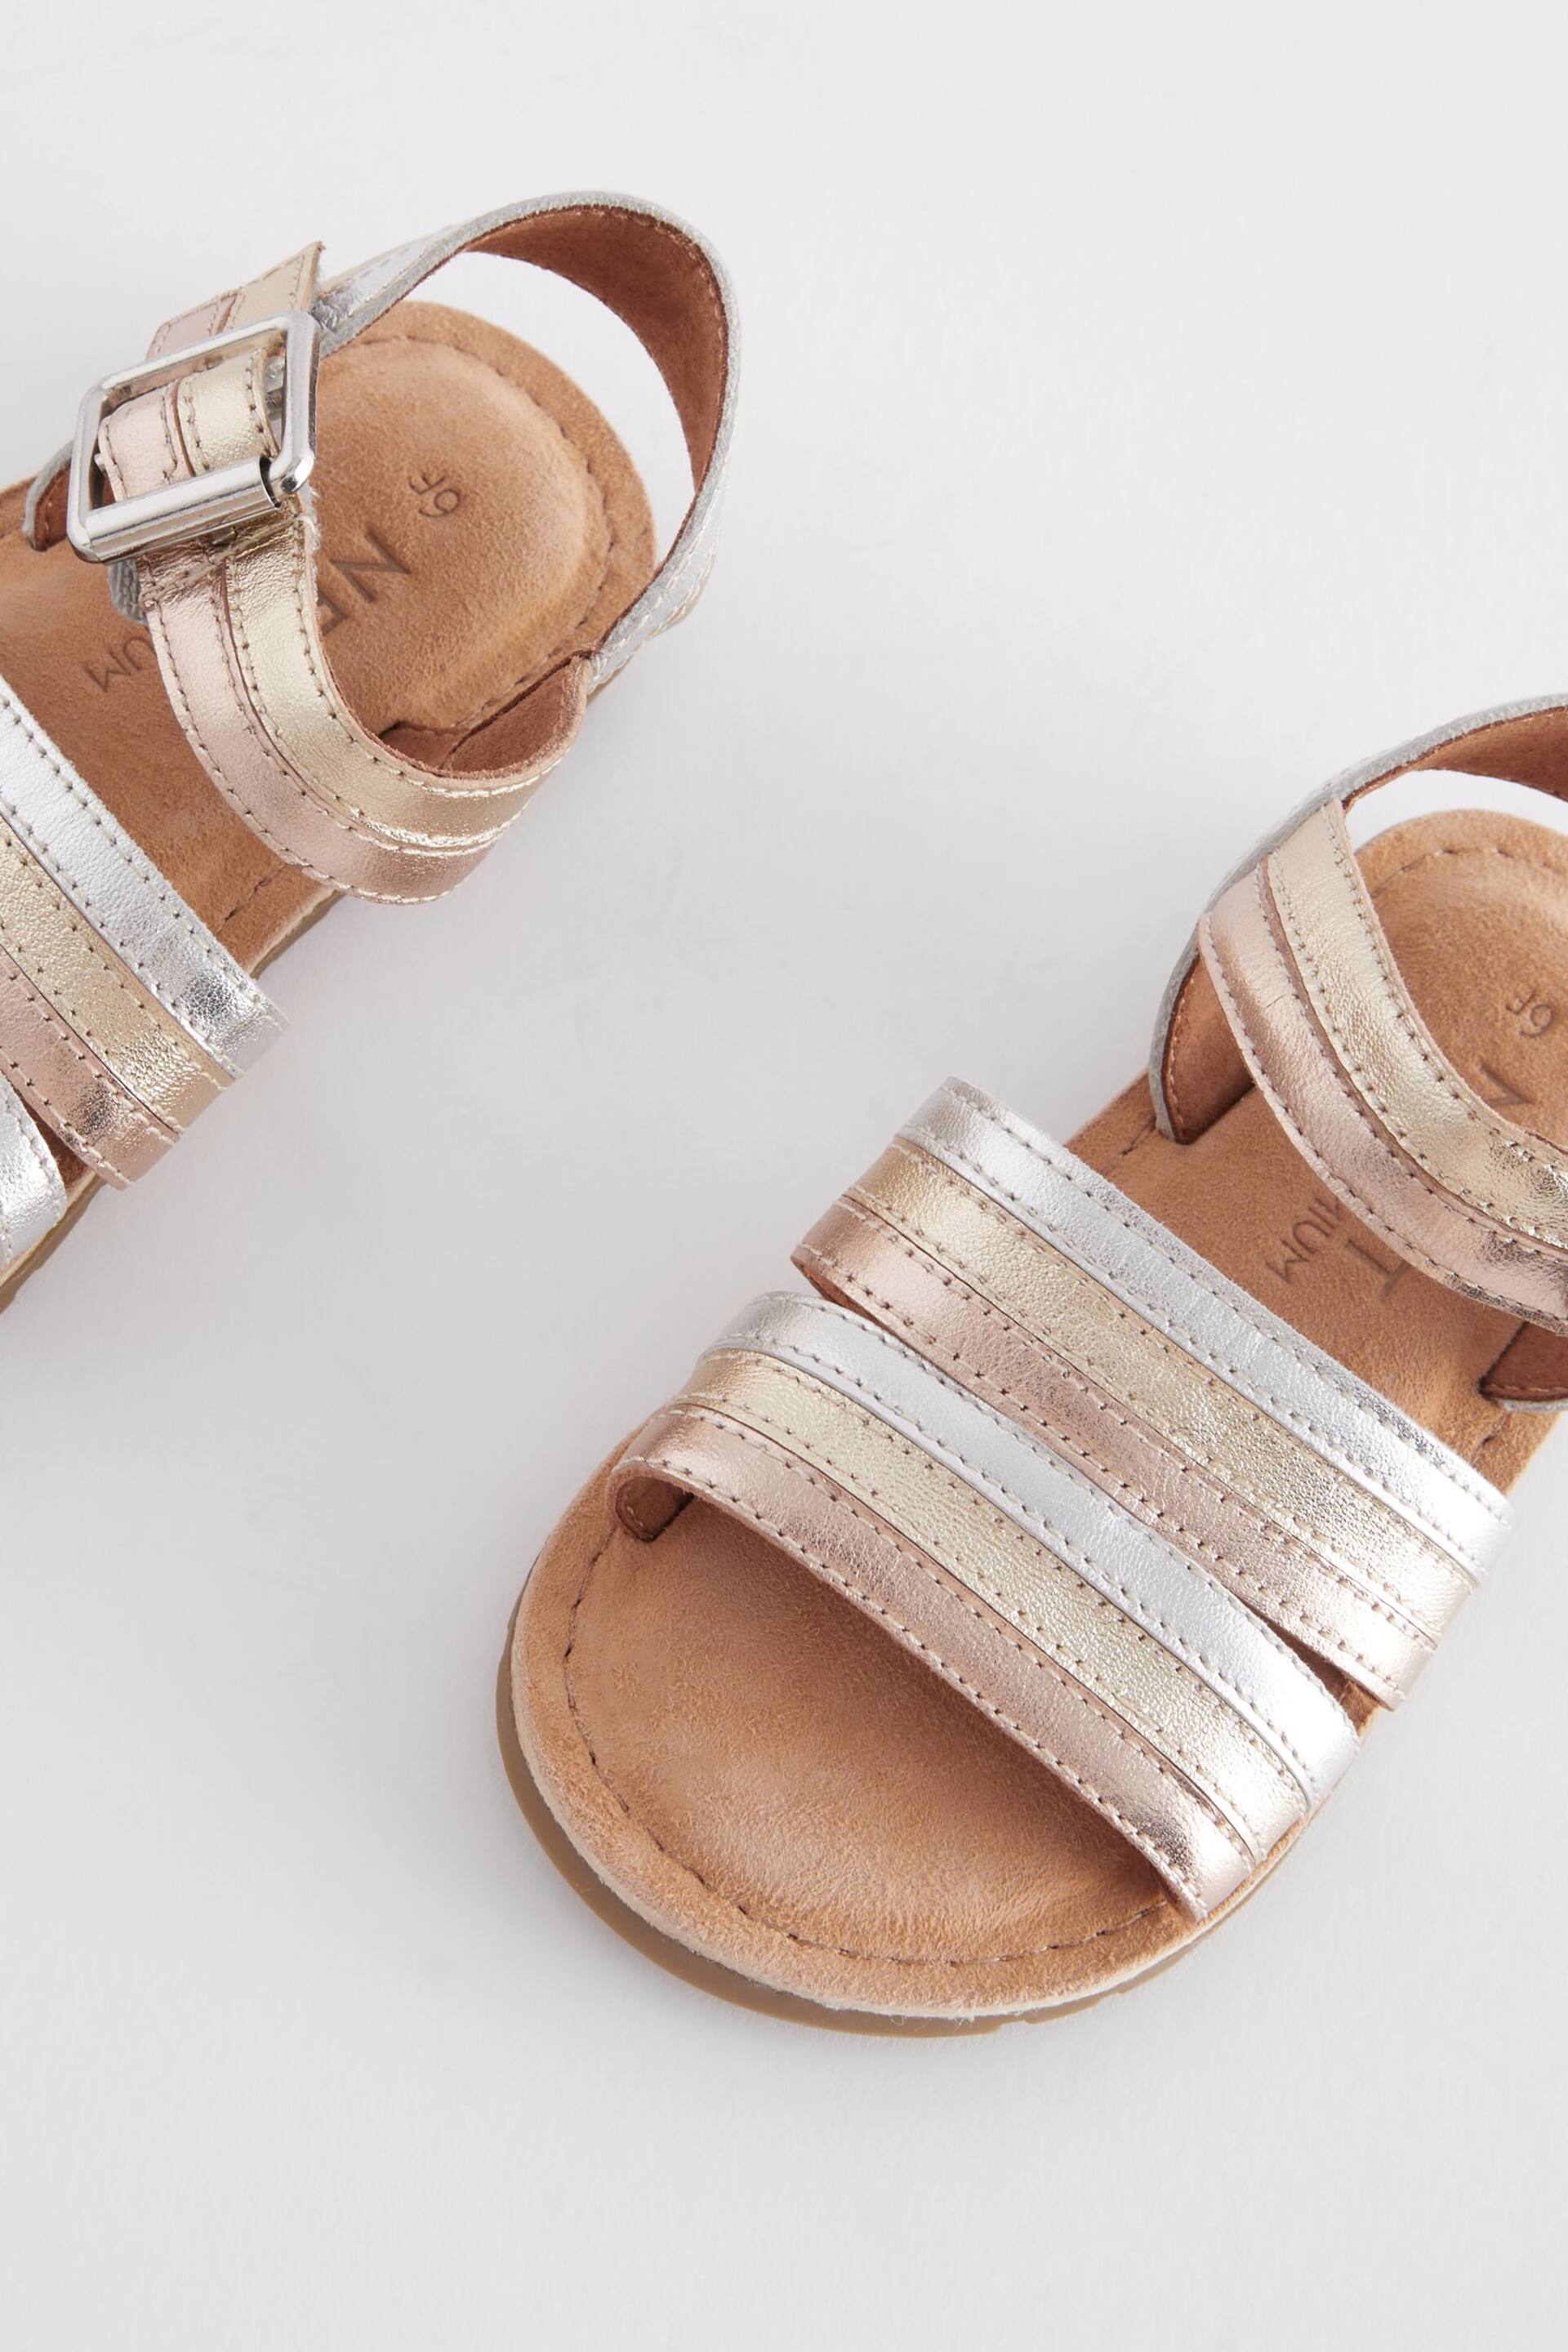 Gold Wide Fit (G) Leather Stripe Sandals - Image 3 of 5